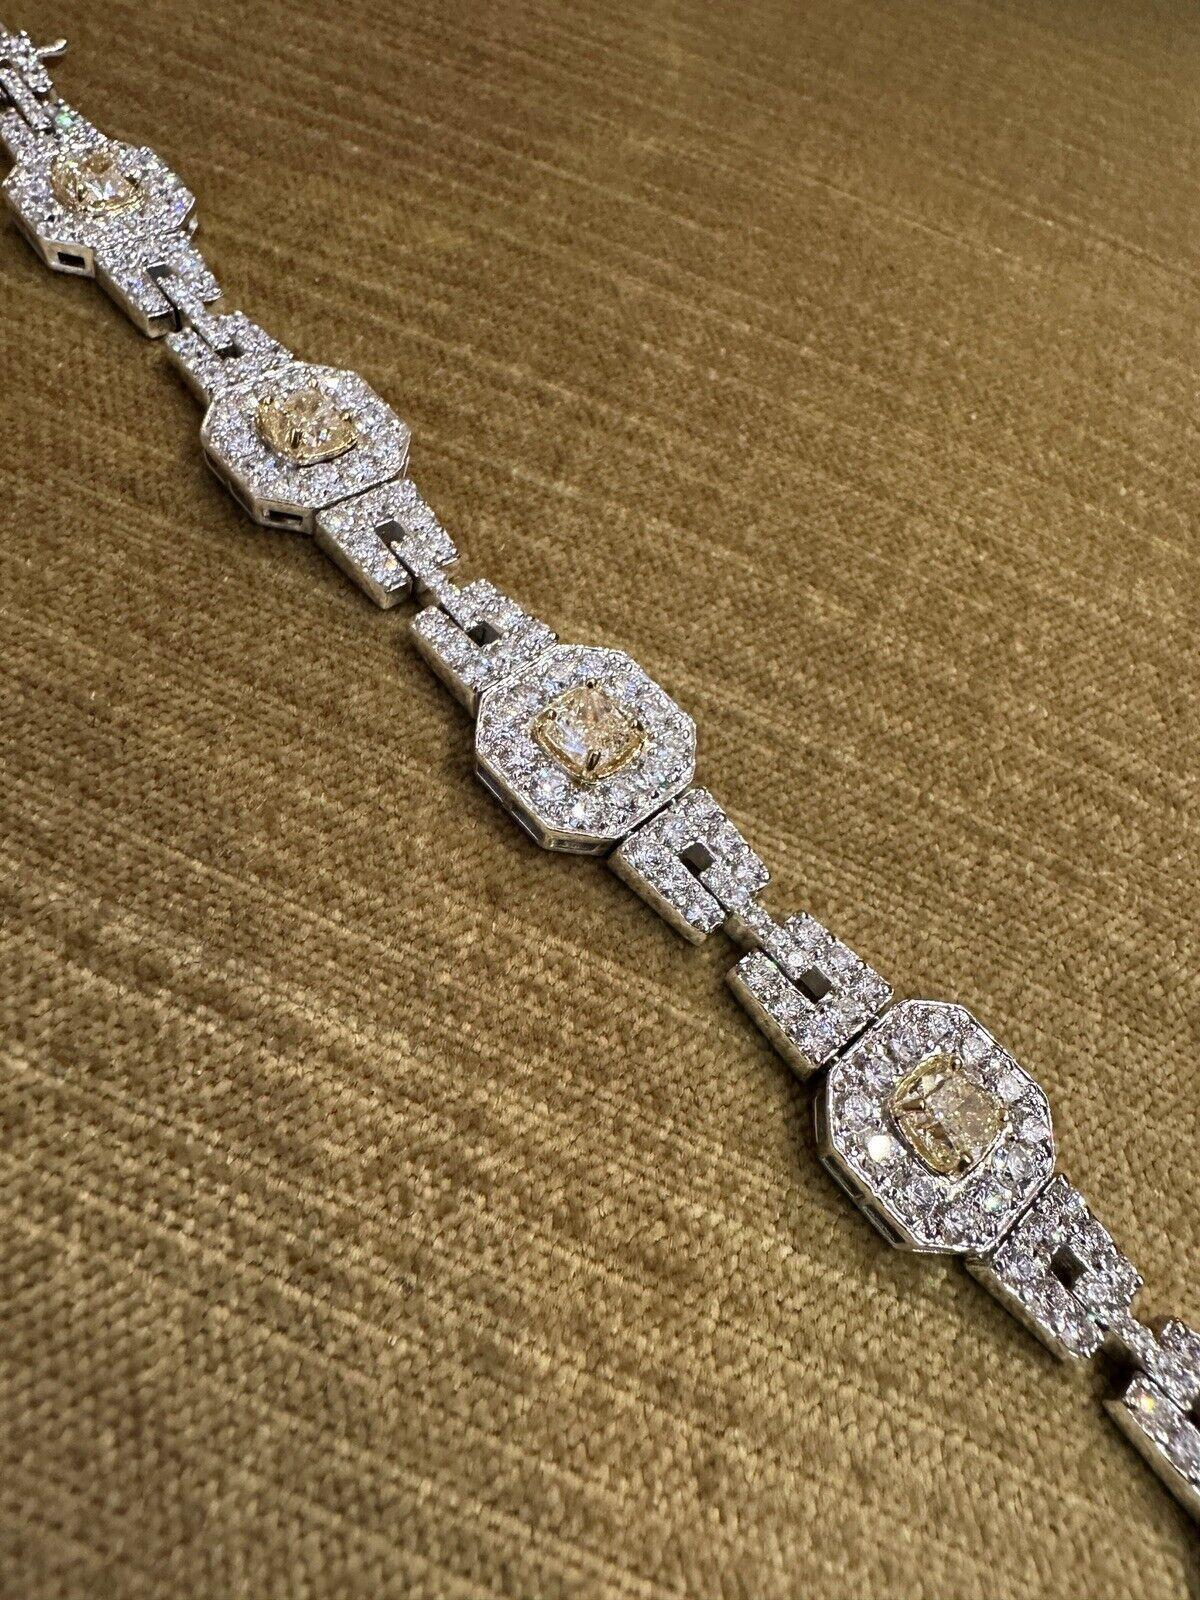 Cushion Cut Natural Yellow and White Diamond Bracelet 15.86 carat total in 18k White Gold For Sale